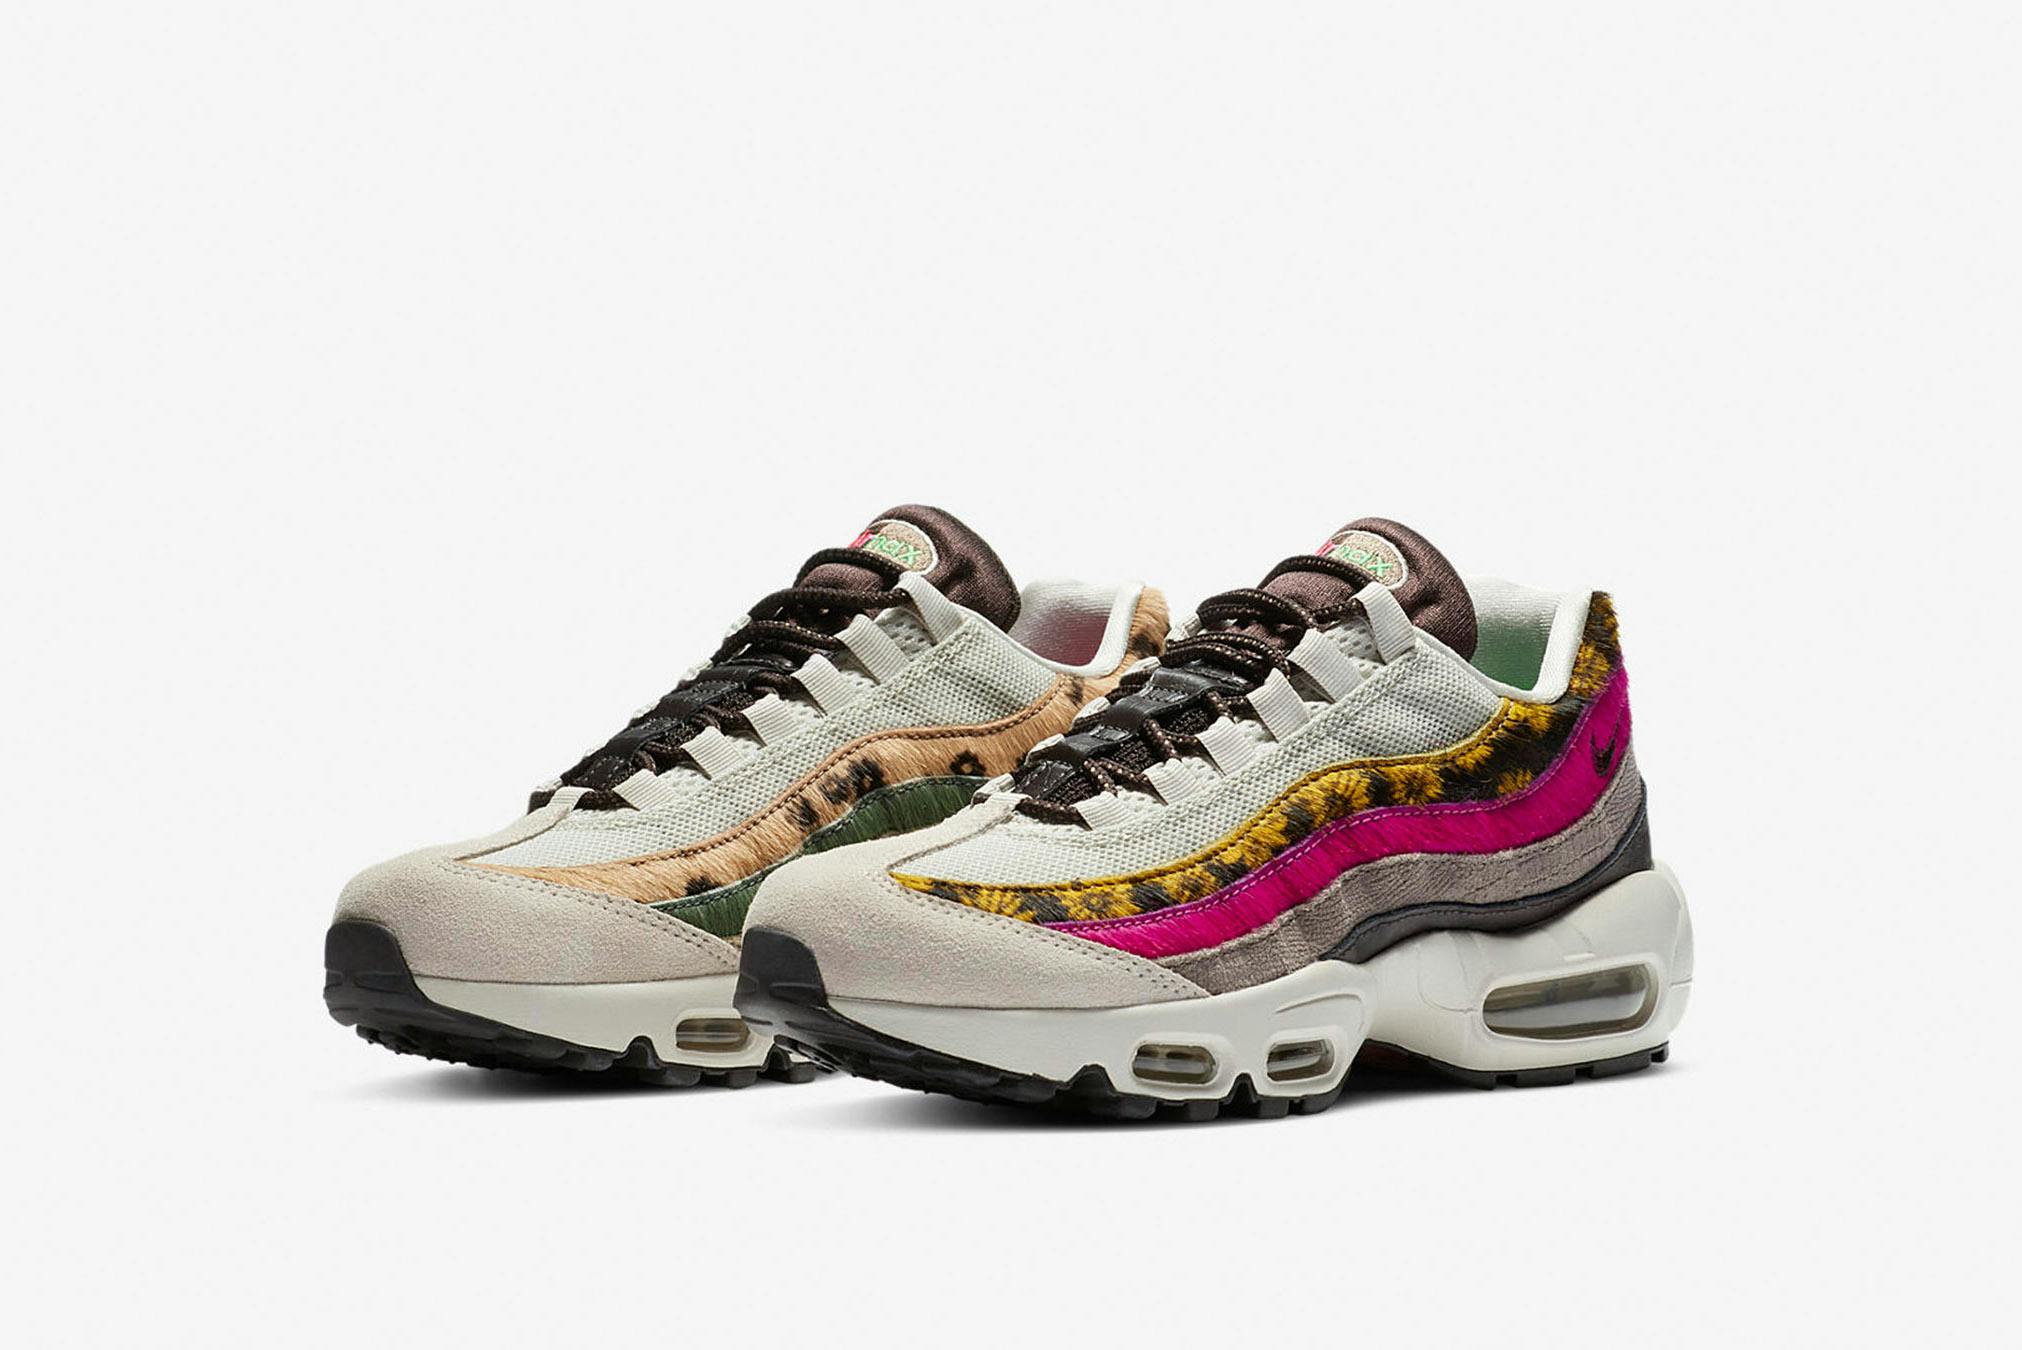 Nike Air Max 95 PRM W - Register Now on END. Launches | END.